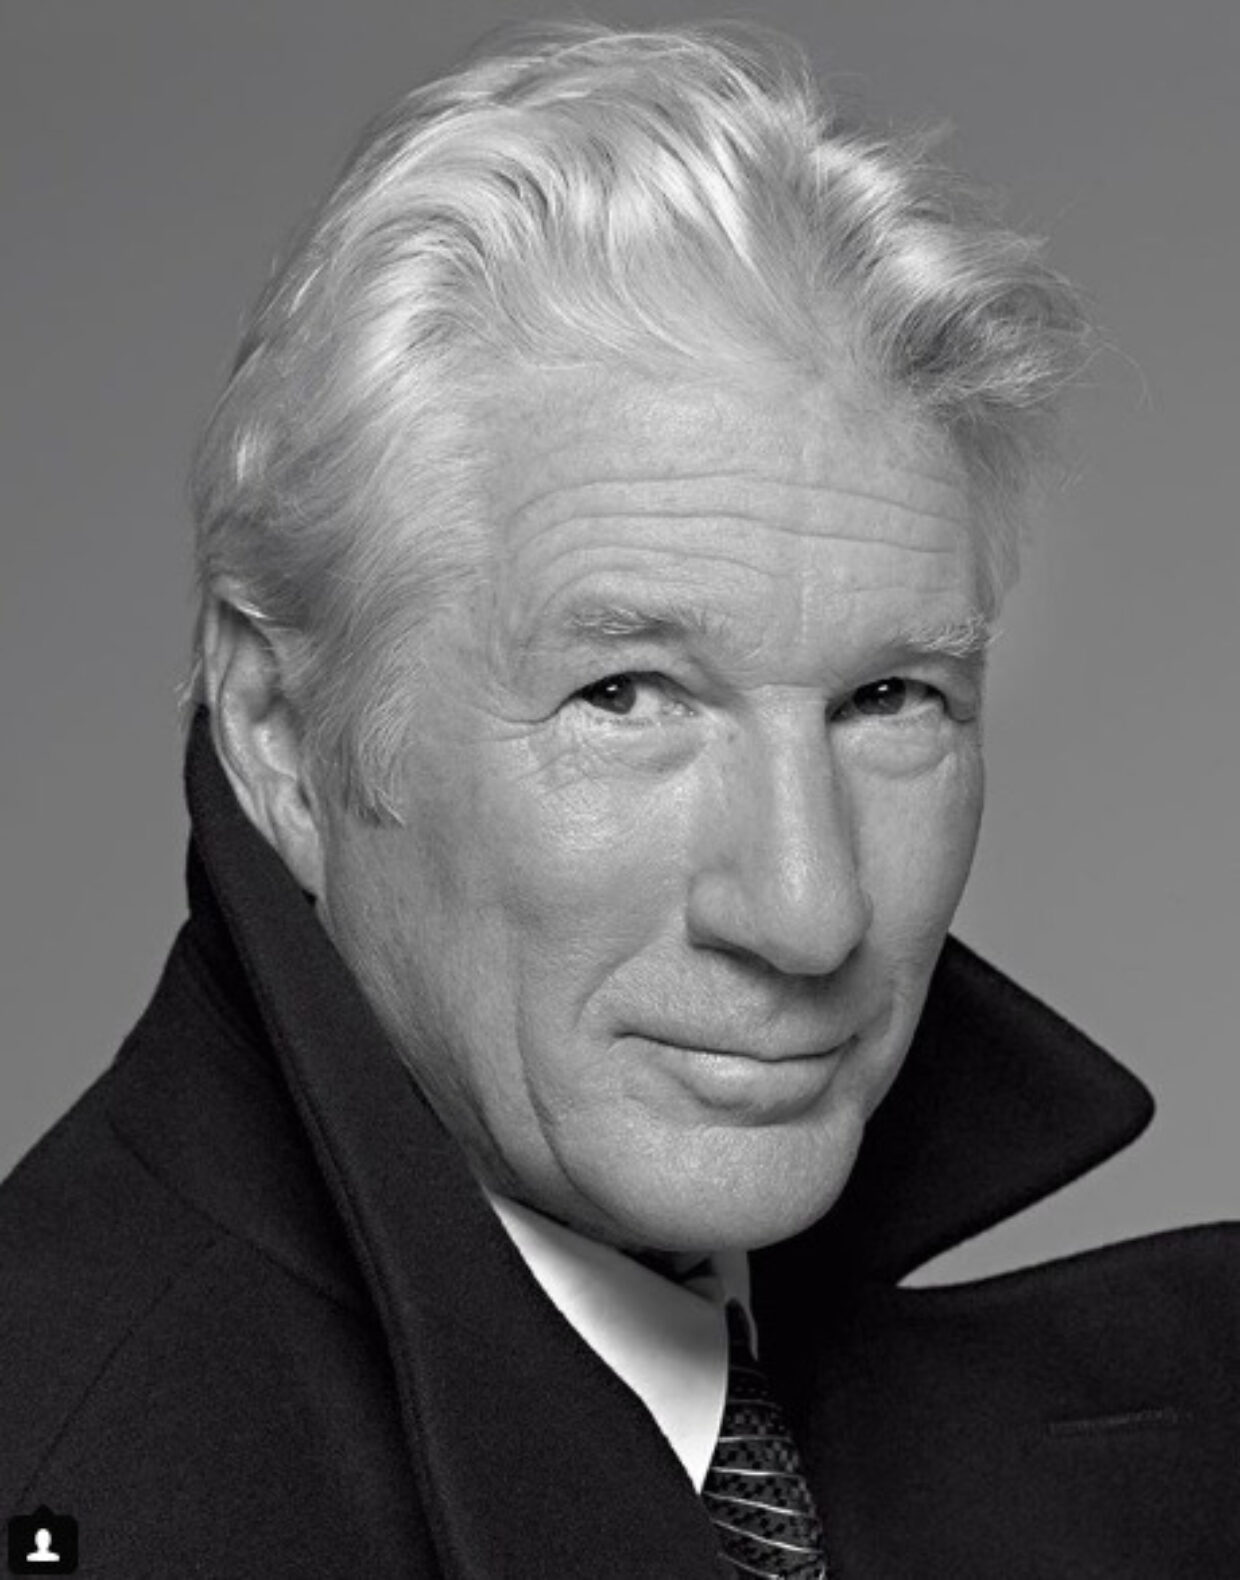 Paul Sinclaire Styled Richard Gere for L’Uomo Vogue | 2